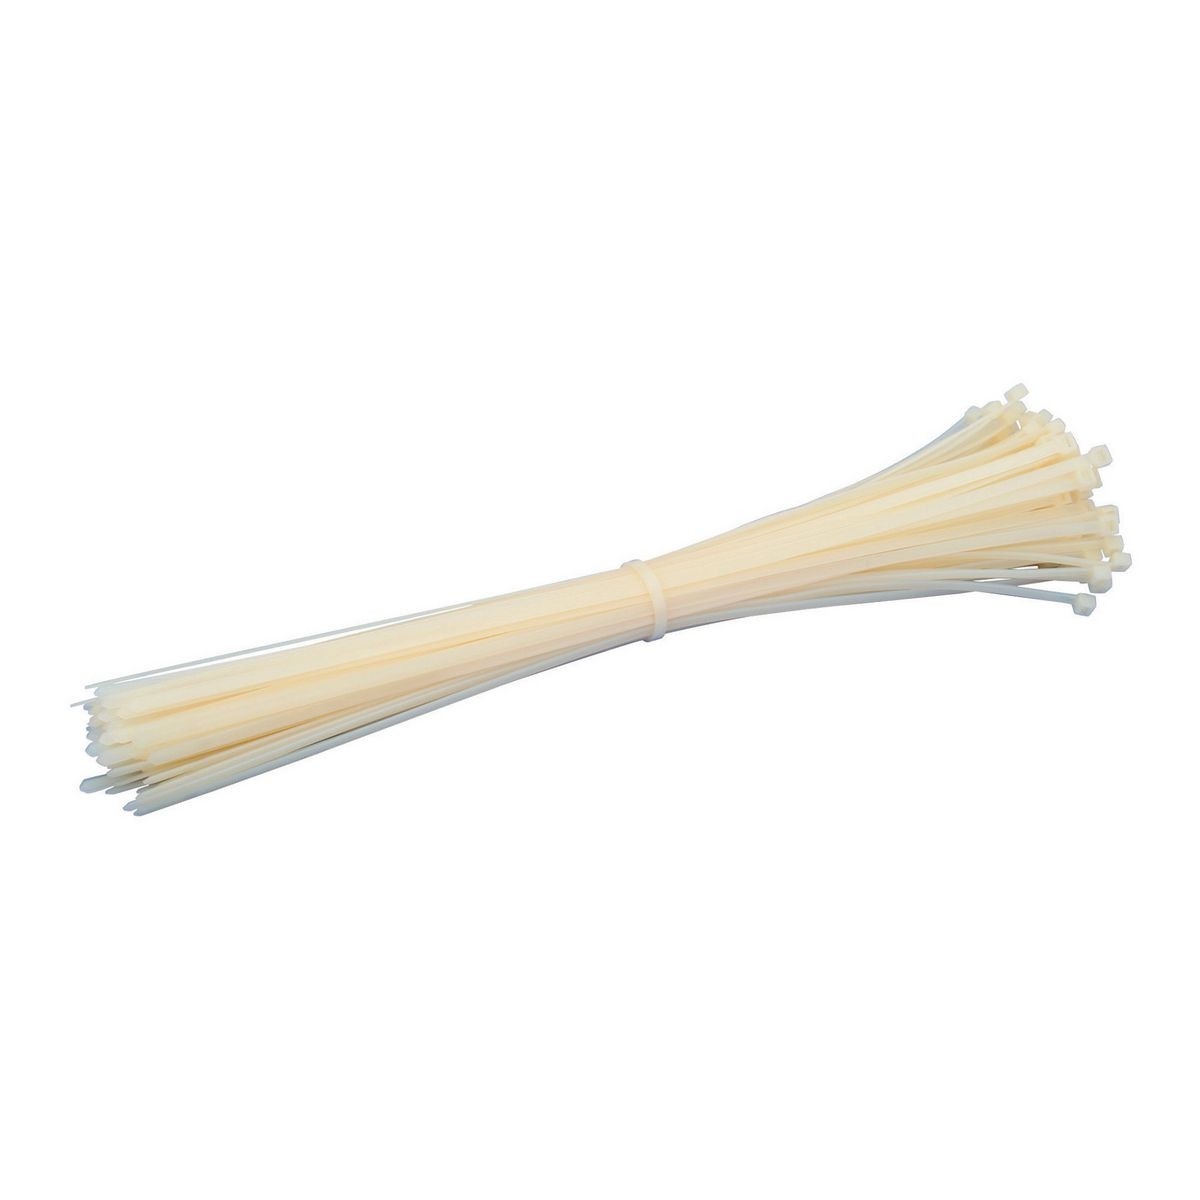 STOREHOUSE 15 in. White Cable Ties 100 Pk. - Item 56018 / 60256 / 69410